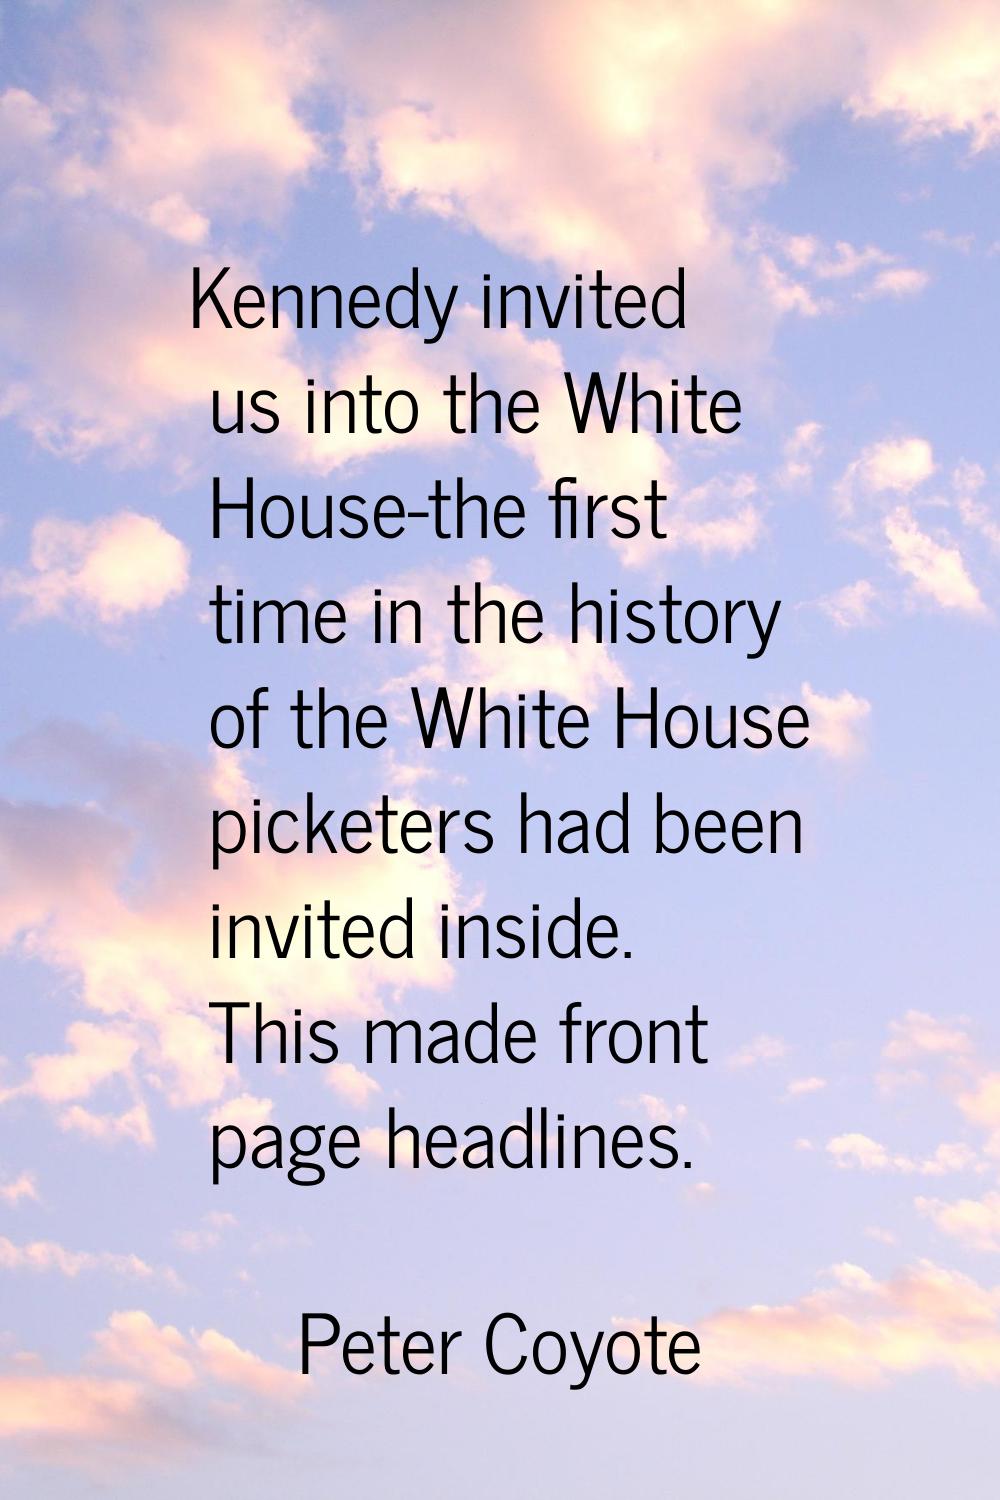 Kennedy invited us into the White House-the first time in the history of the White House picketers 